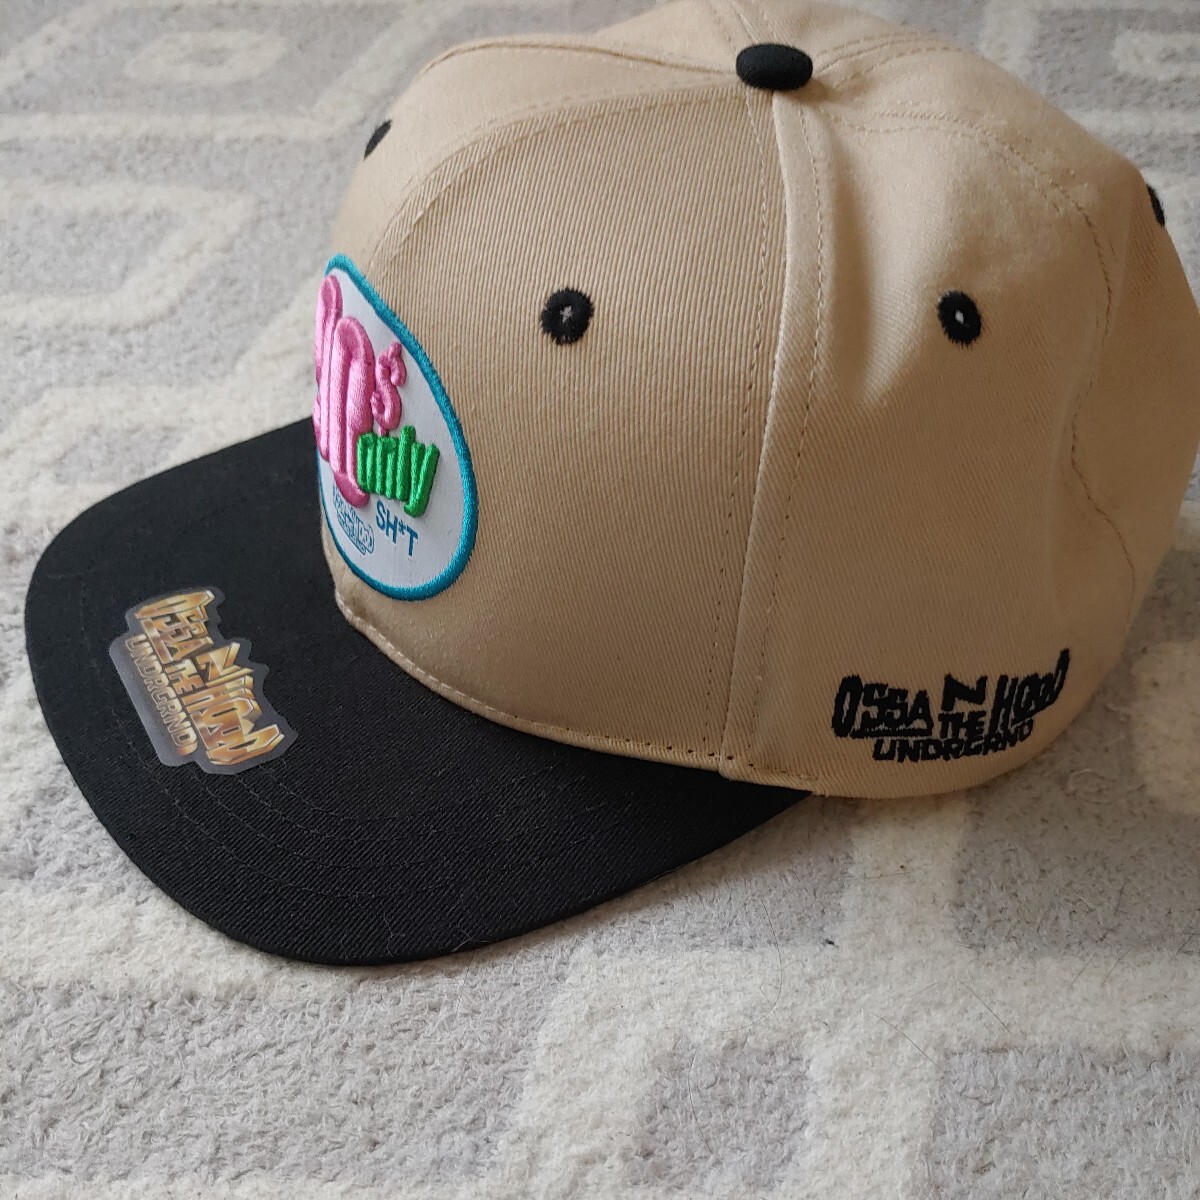 NICETY OSSAN THE HOOD cap hat SNAPBACK lowrider usdm Mini tiger tiger  gold high speed have lead 